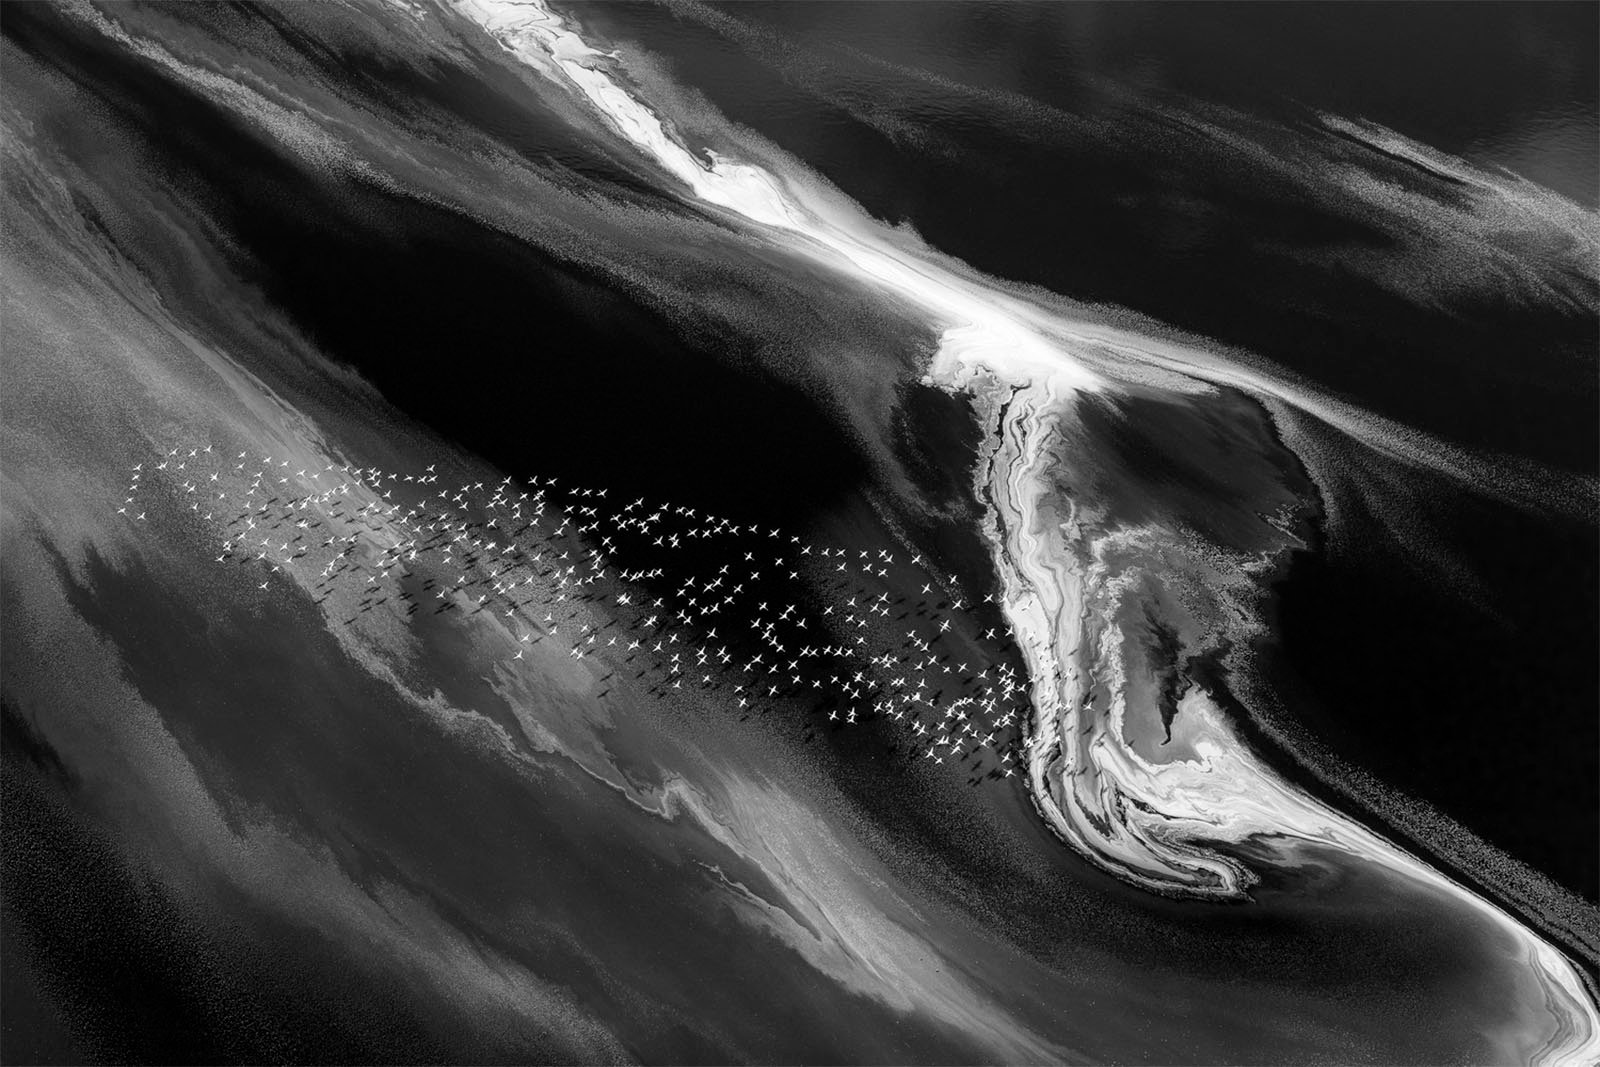 A black and white aerial image of a swirling river with white birds flying over it, creating a striking contrast between the dark water and foamy currents. The scene appears abstract due to the patterns formed by the water and light.